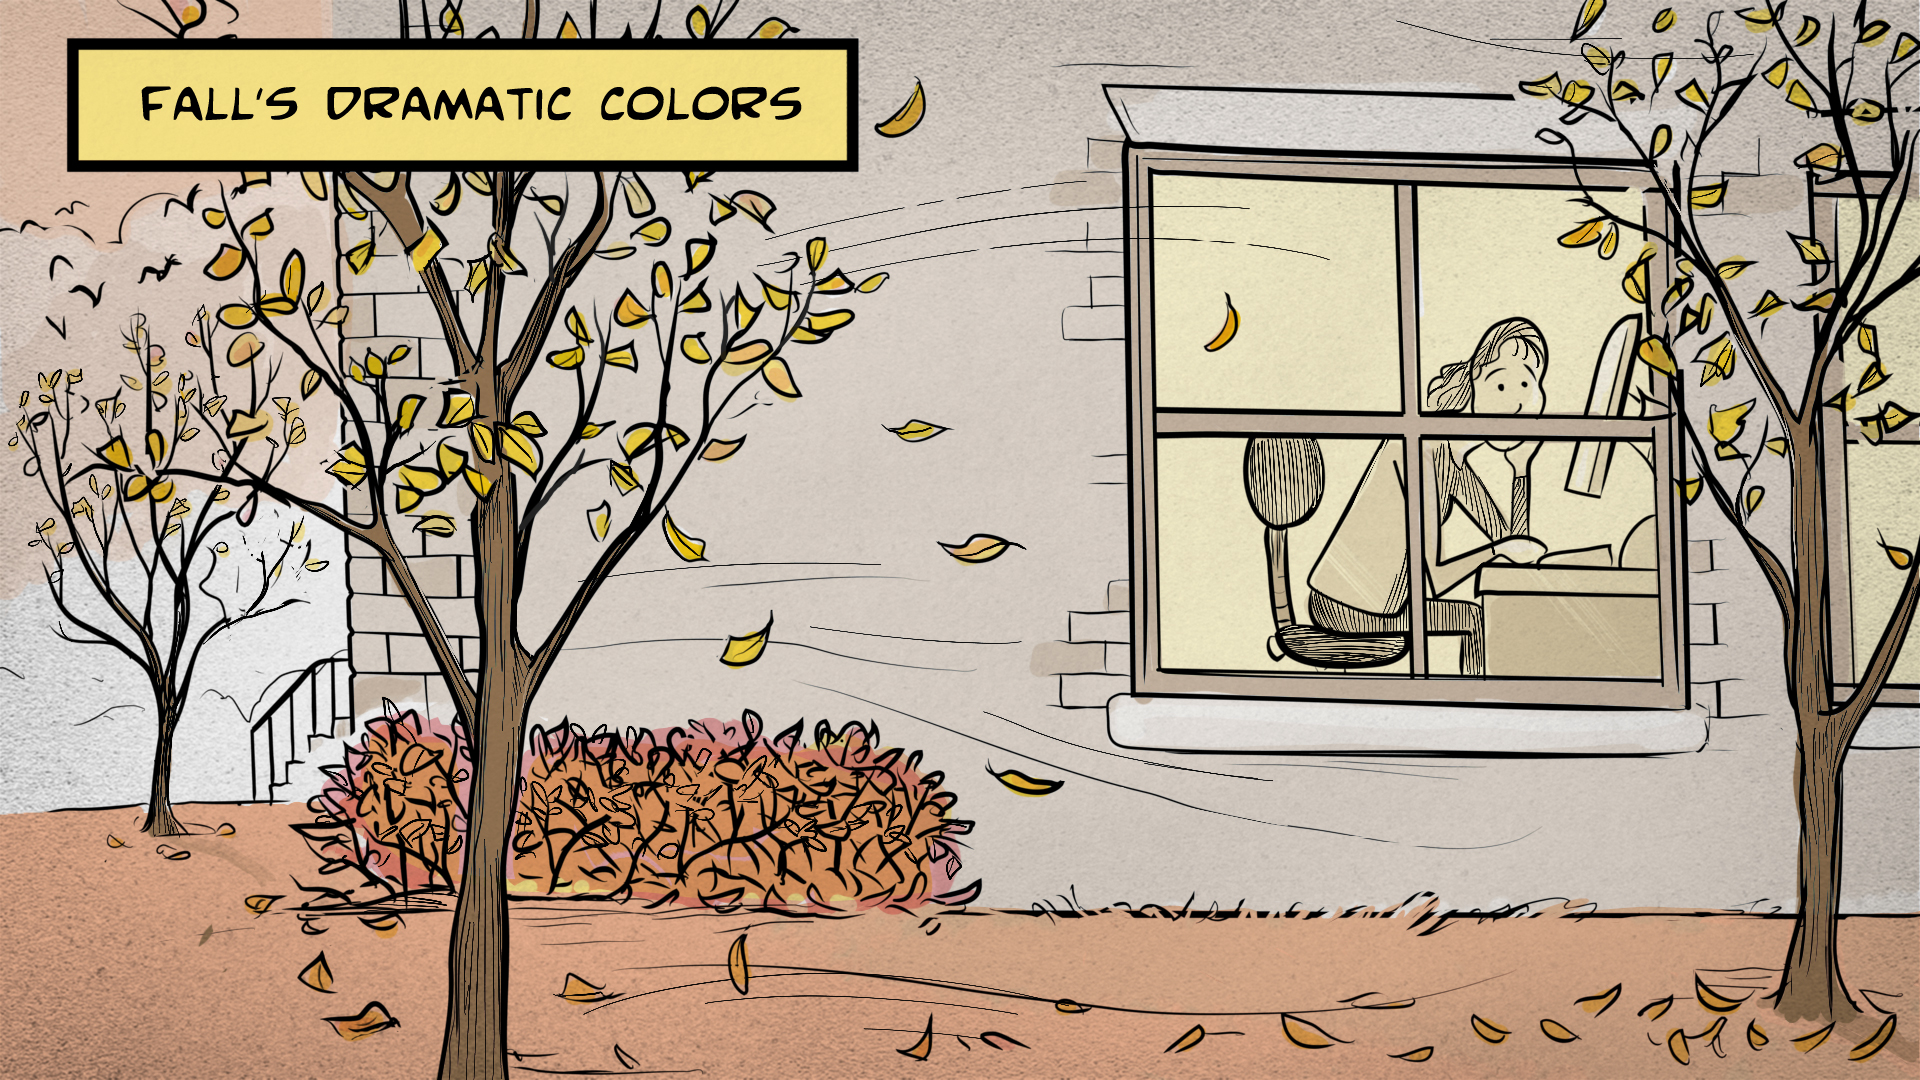 Fall's dramatic colors: Sasha is sitting at a desk inside behind a large window, gazing out at a fall scene with blowing leaves and trees with fall color.